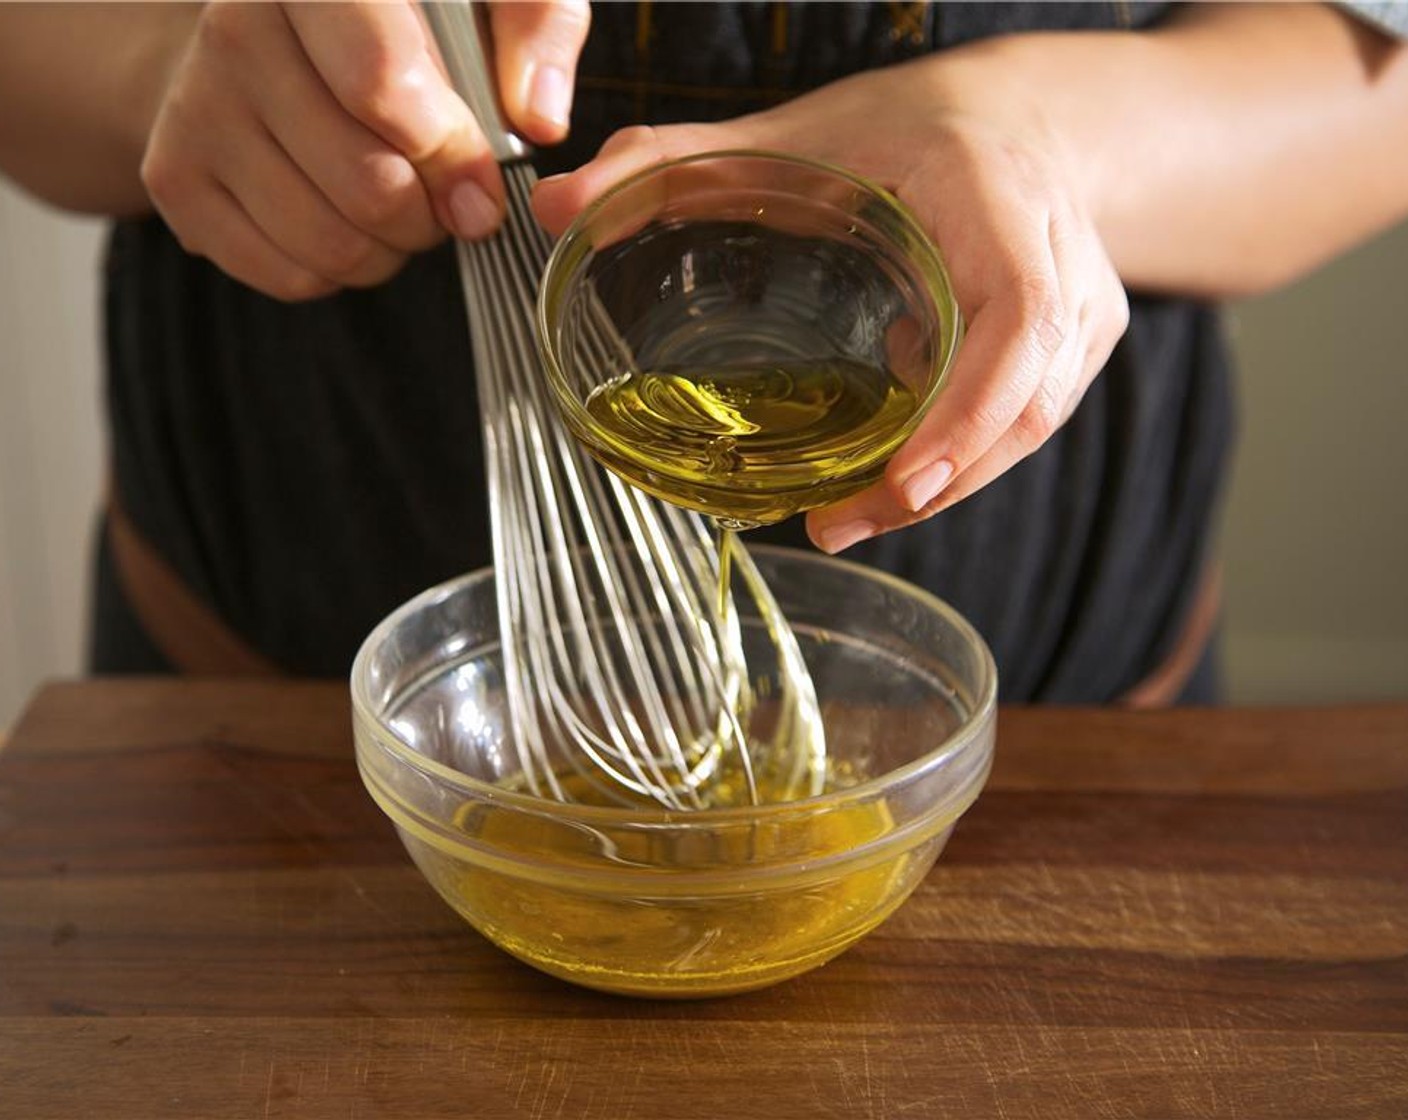 step 8 Slowly pour Olive Oil (1/4 cup) into the bowl, whisking constantly, until the oil is incorporated into mixture. Season with Salt (1/4 tsp) and Ground Black Pepper (1/4 tsp).